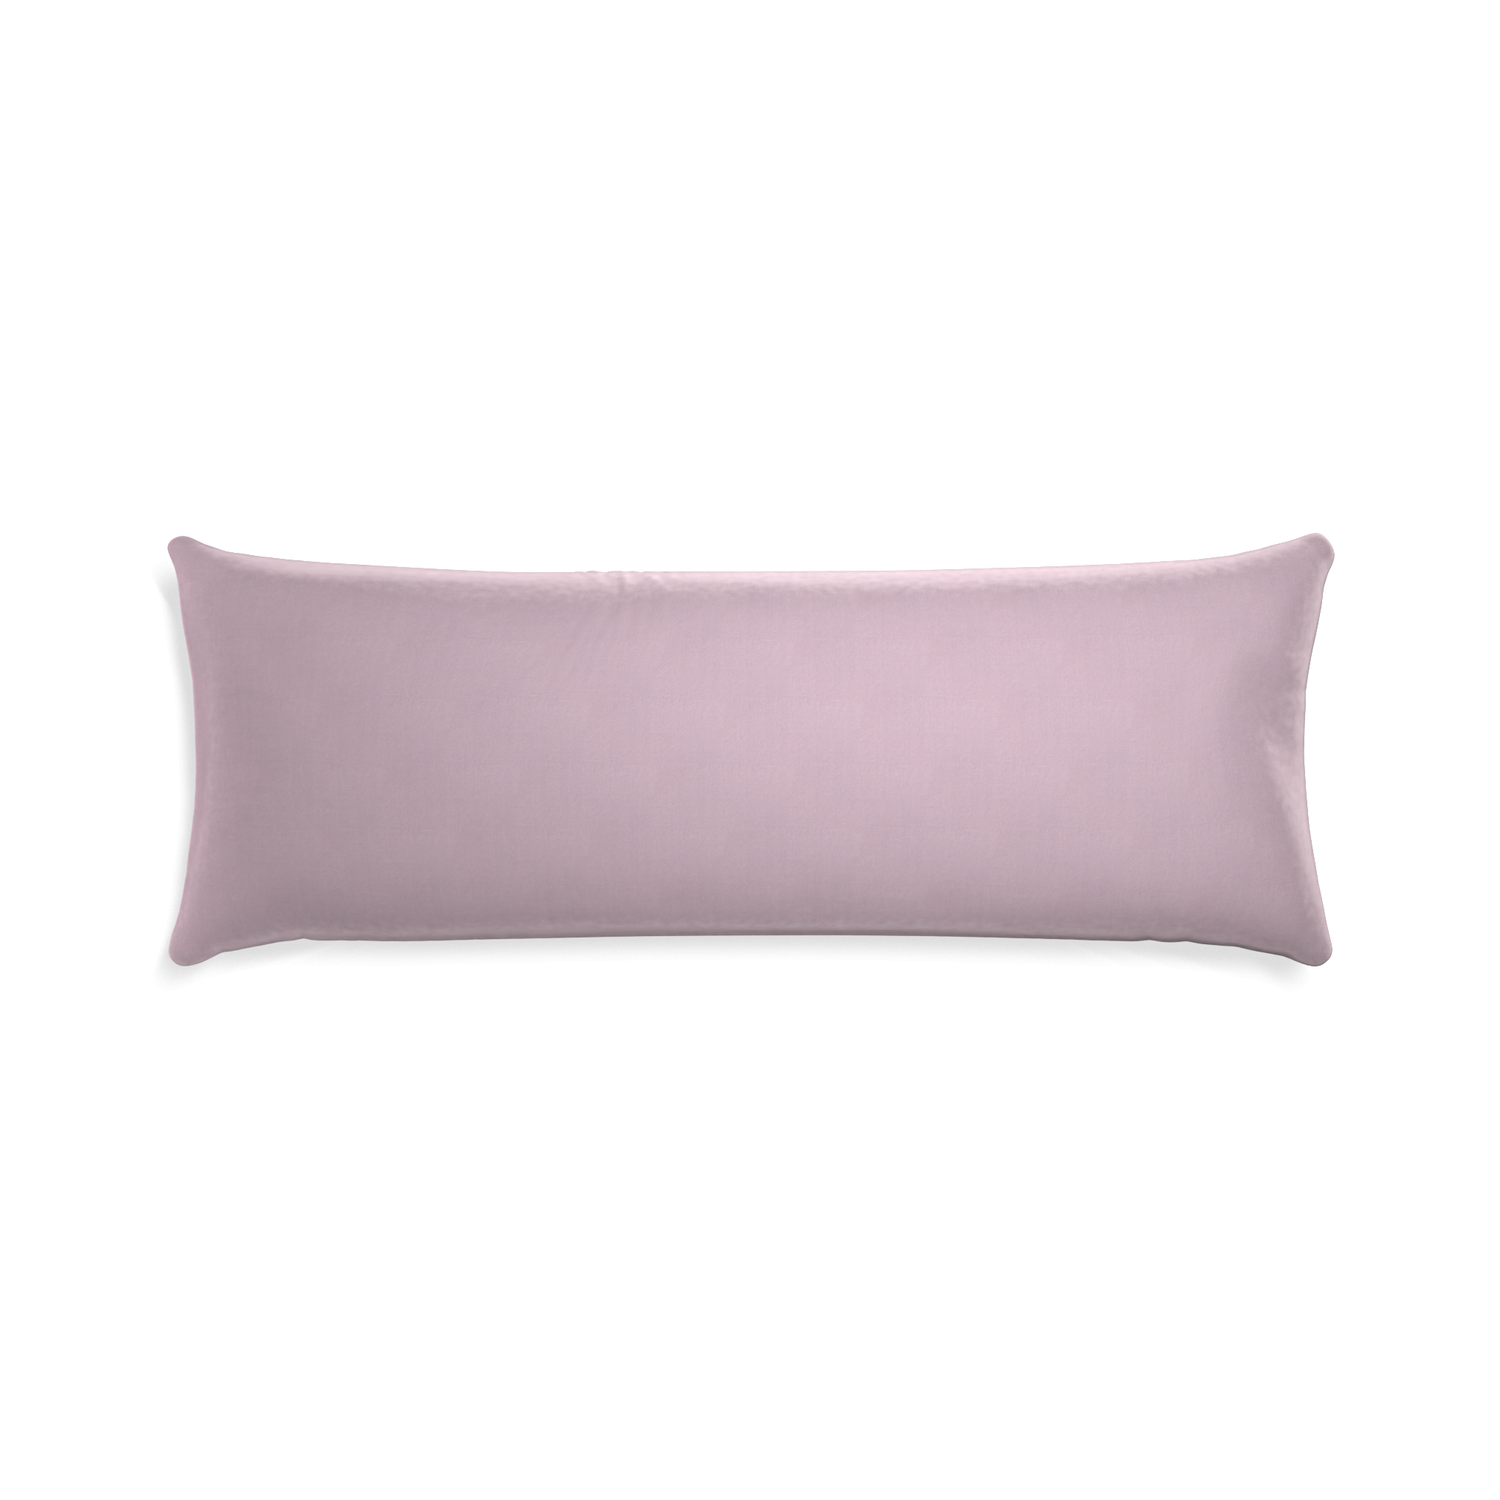 Xl-lumbar lilac velvet custom lilacpillow with none on white background